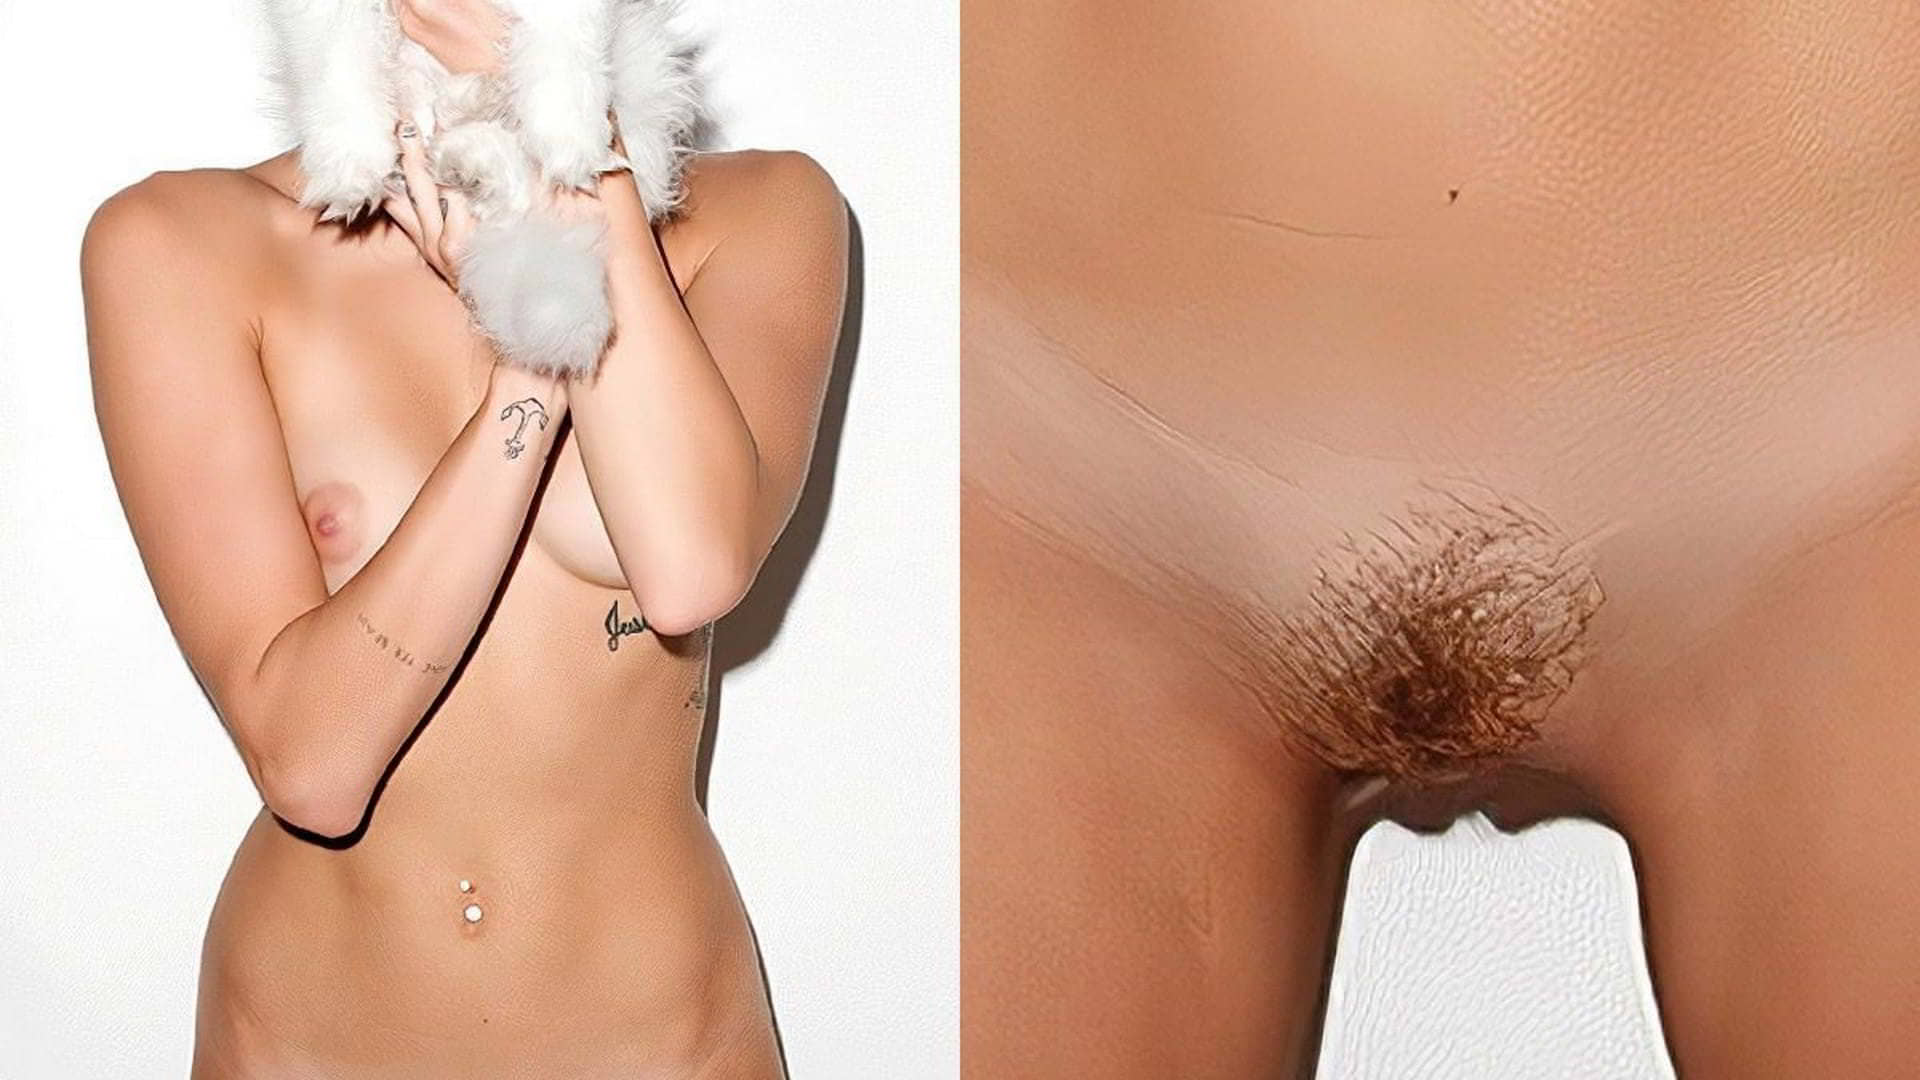 Index of /free3/images/miley-cyrus-nude-pussy-collection-2.